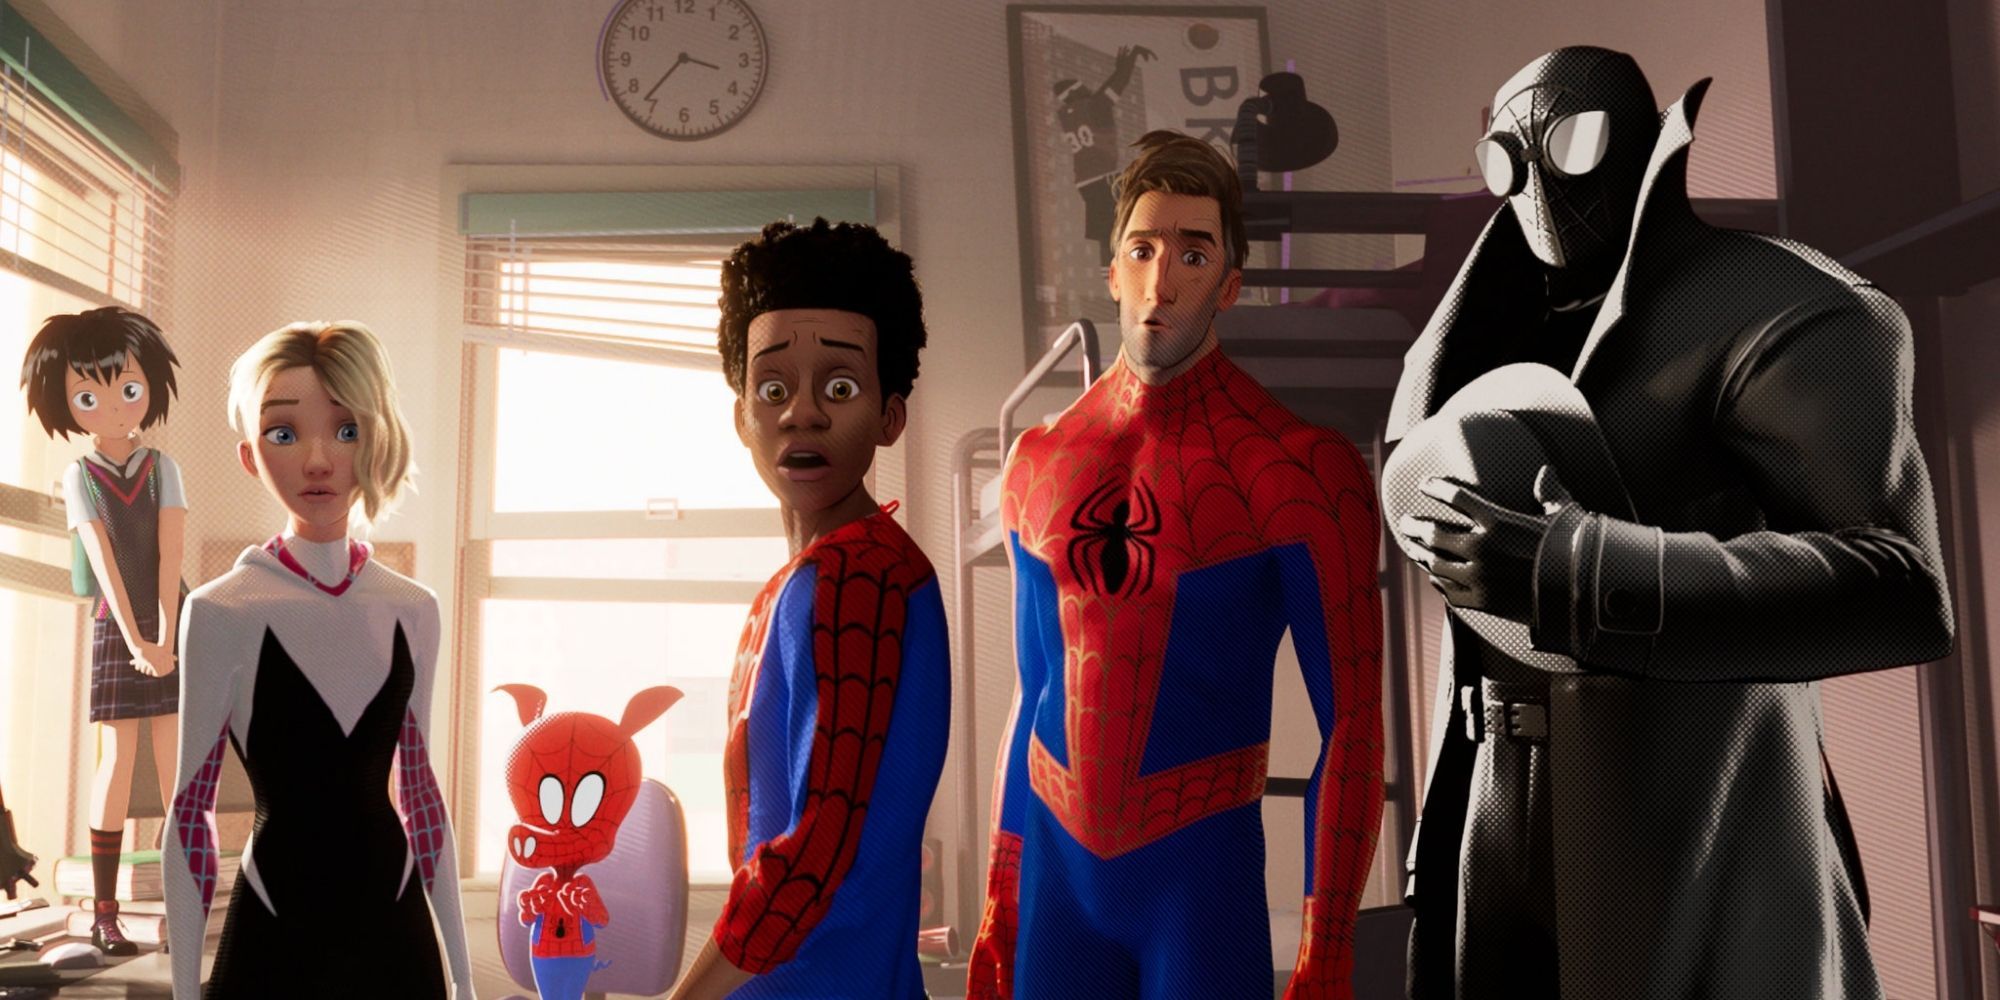 Spider people from across the spider-verse collide